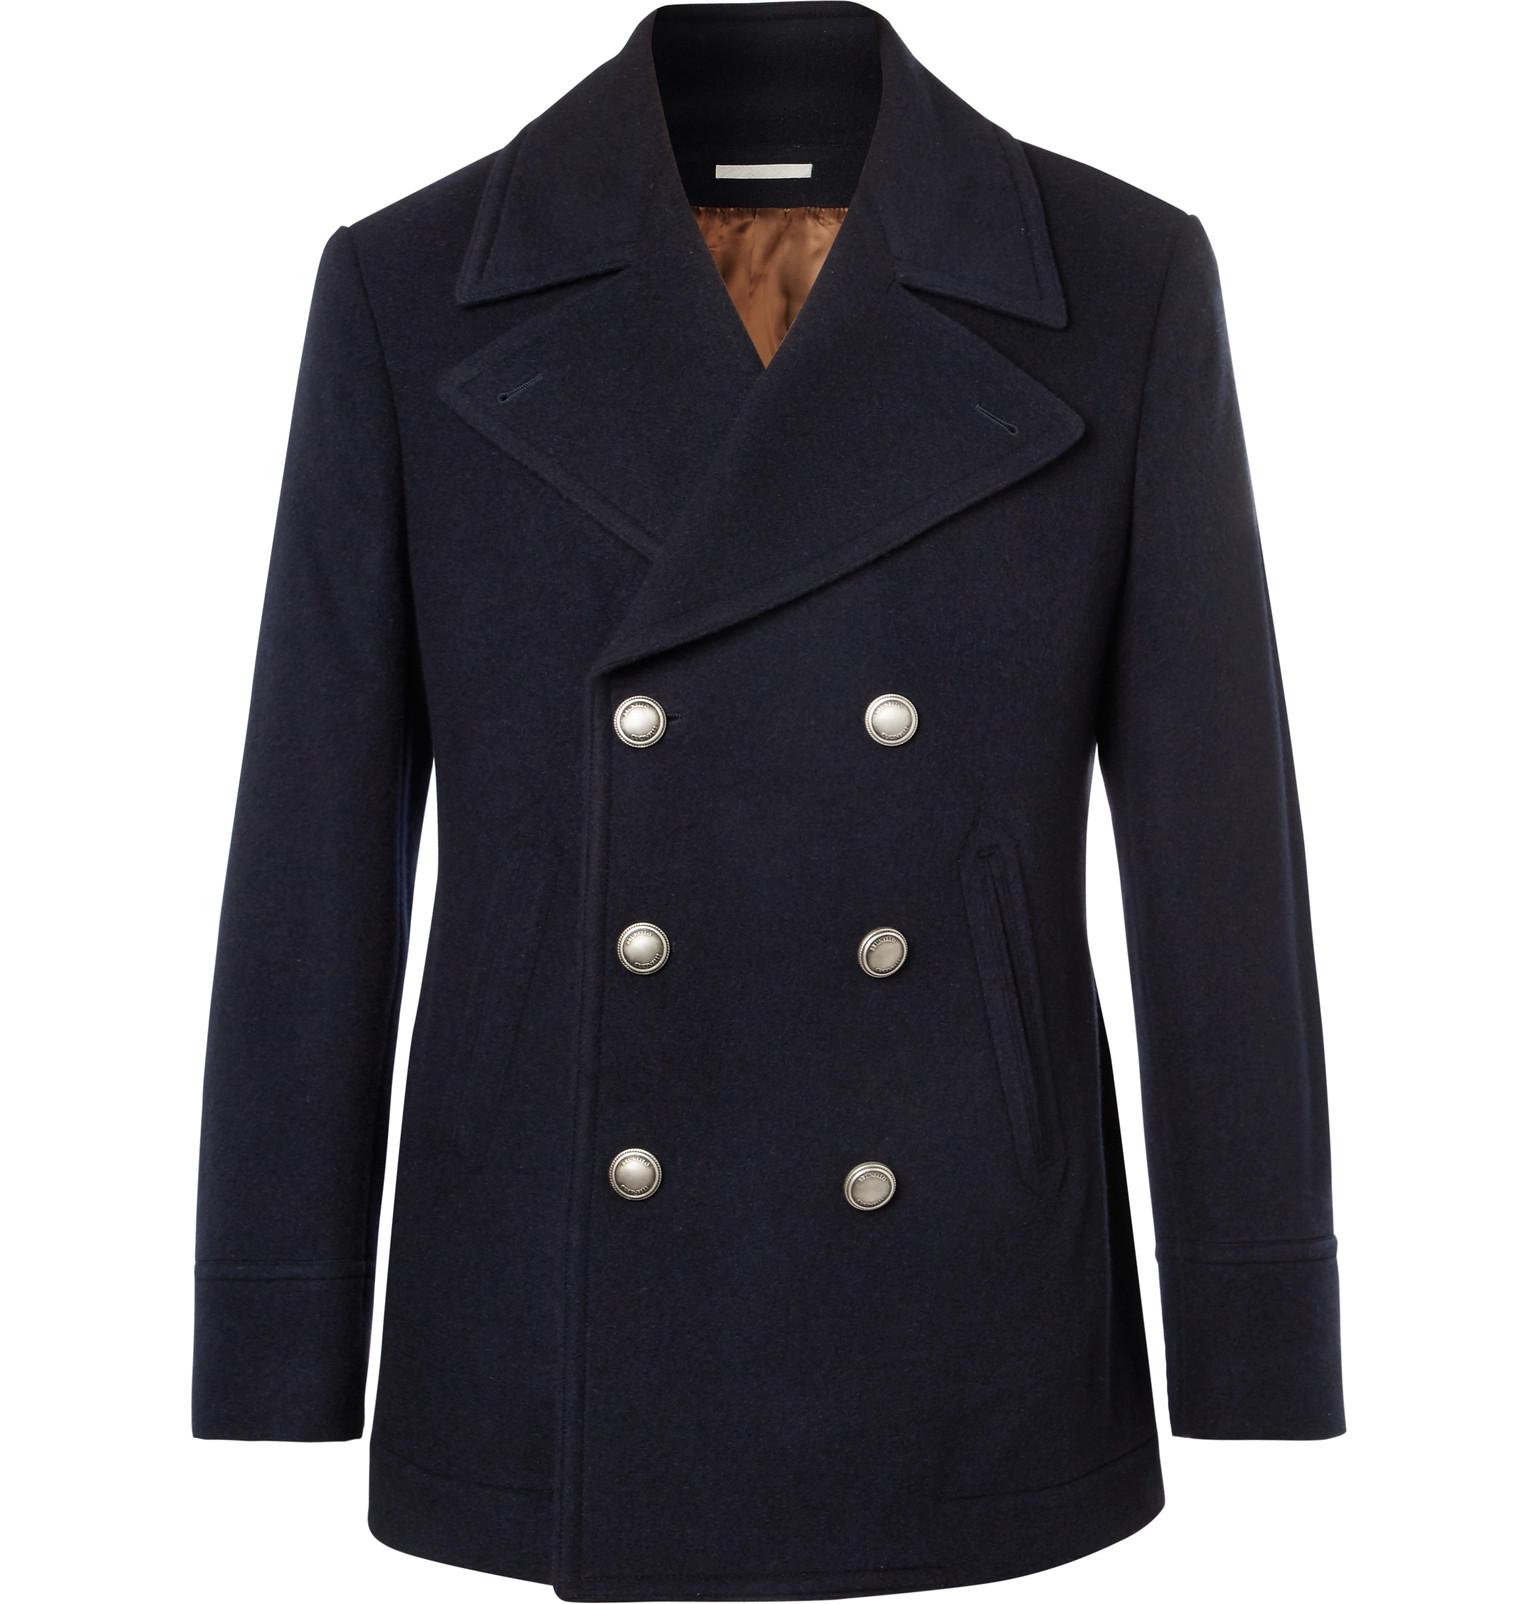 Brunello Cucinelli Cashmere Peacoat in Navy (Blue) for Men - Lyst